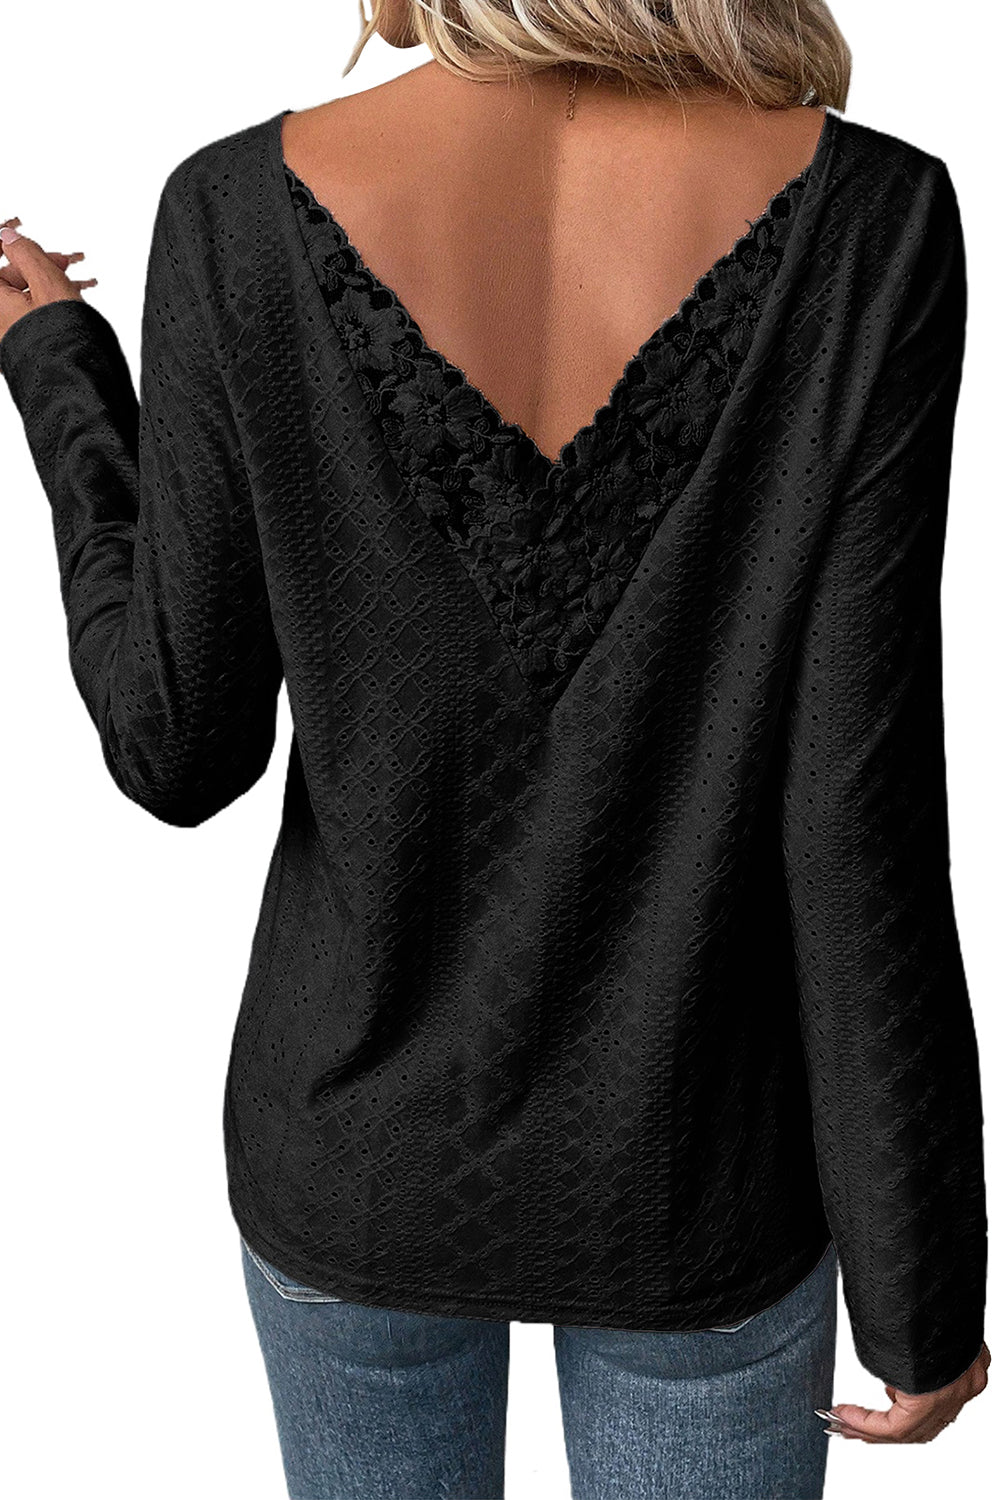 Black Floral Lace Splicing Eyelet Long Sleeve Top-3